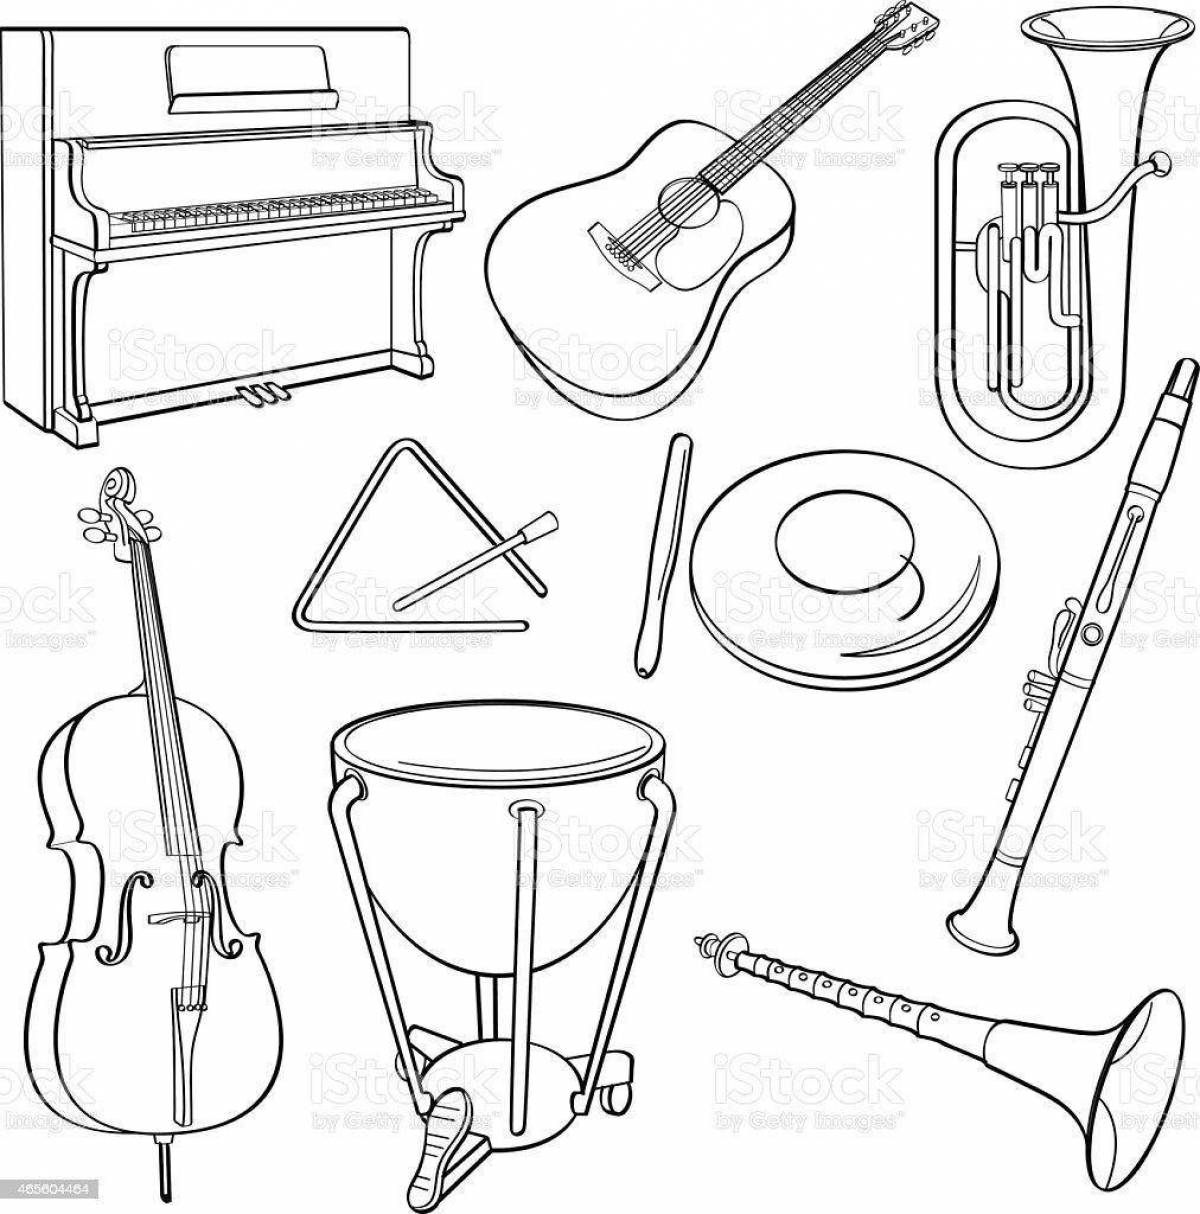 Glowing orchestra coloring page for kids